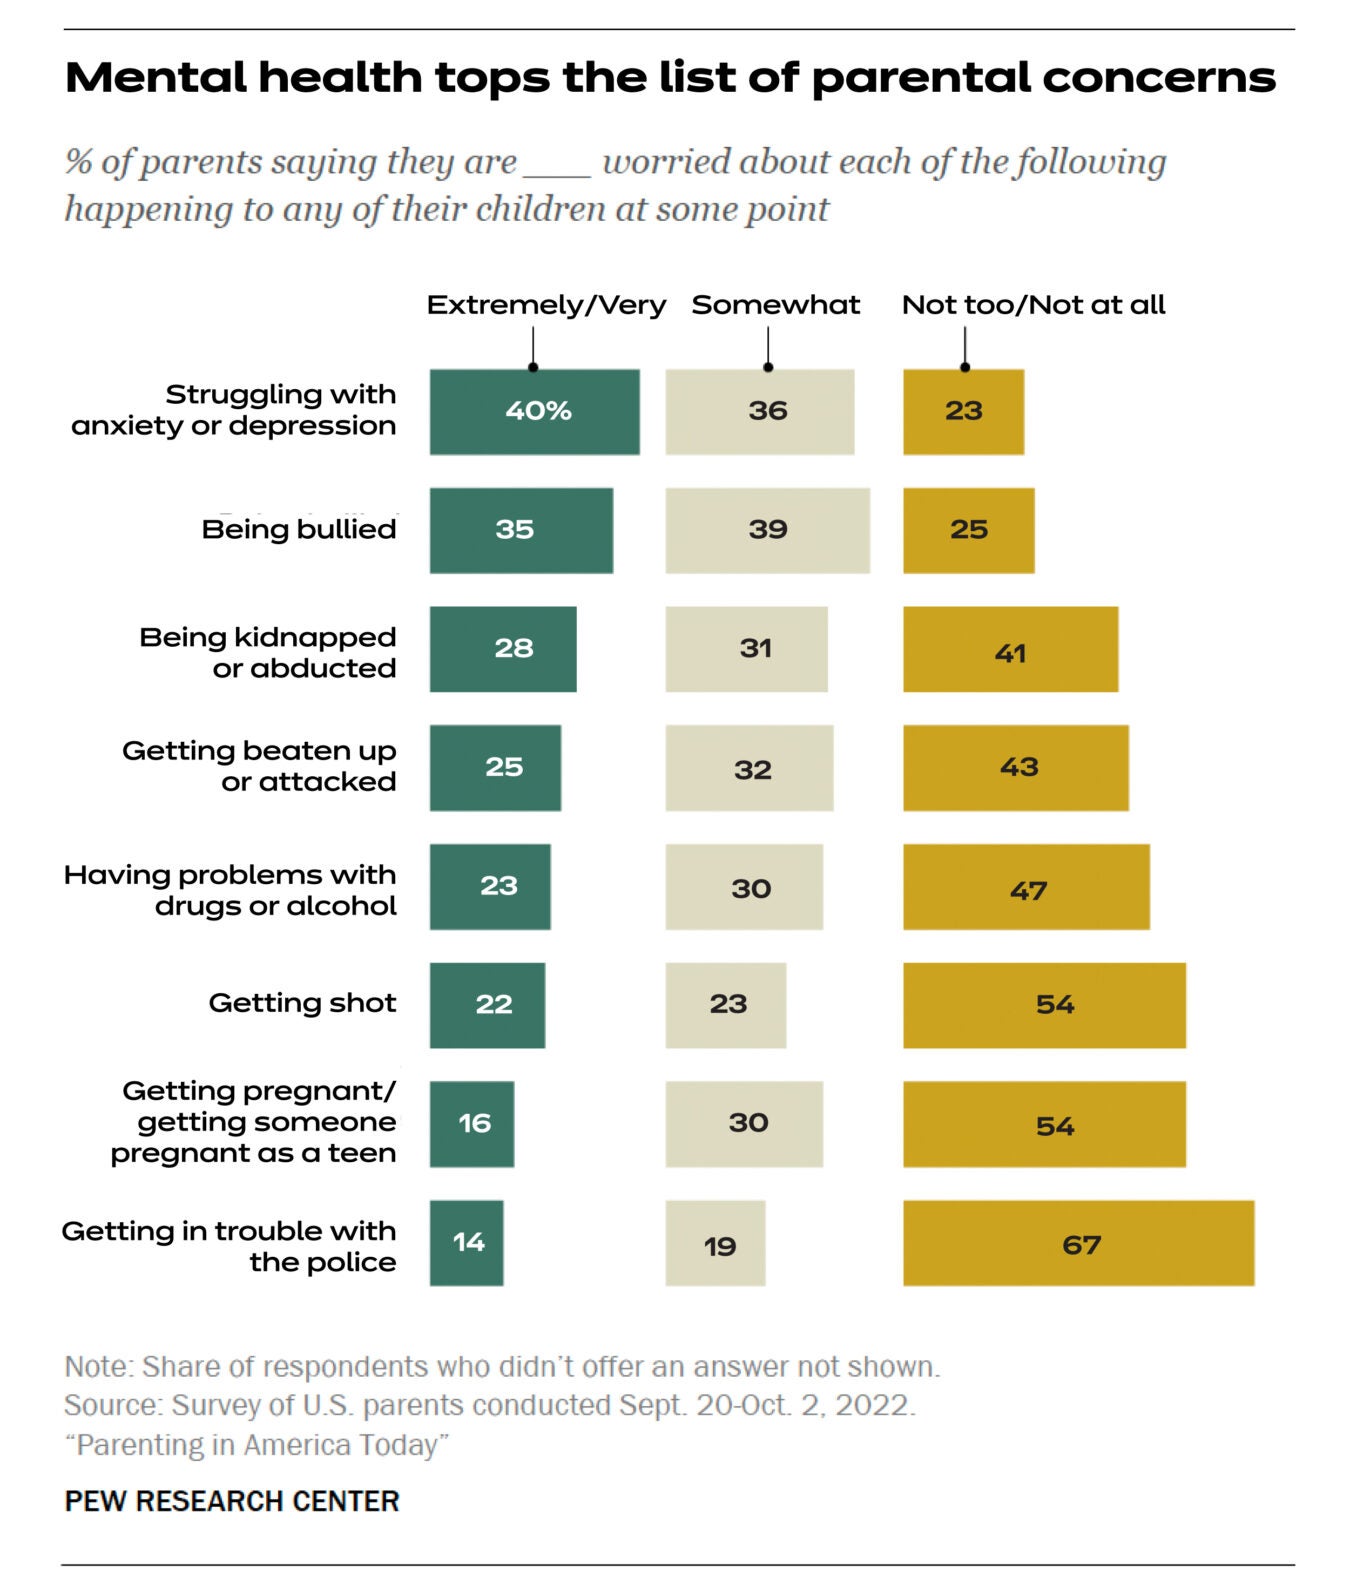 Bar chart shows mental health tops list of parental concerns with 40% extremely worried their child is struggling with anxiety or depression. Second on the list is bullying at 35%. (Pew Research Center)